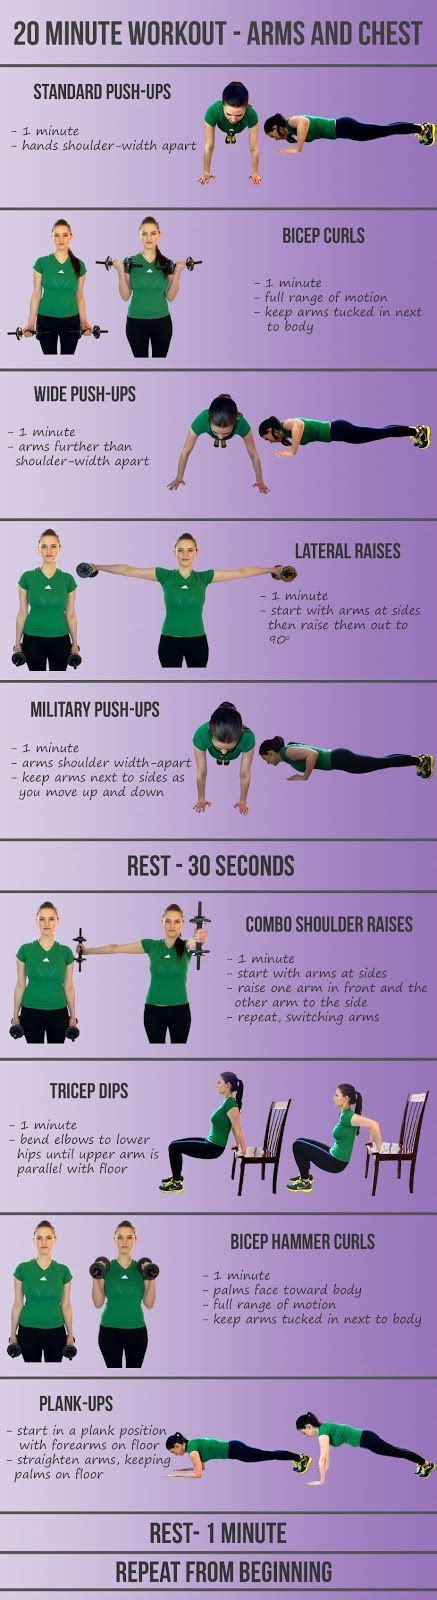 20 Minute Workout To Get Toned And Strong Arms Fitness Workouts Sport